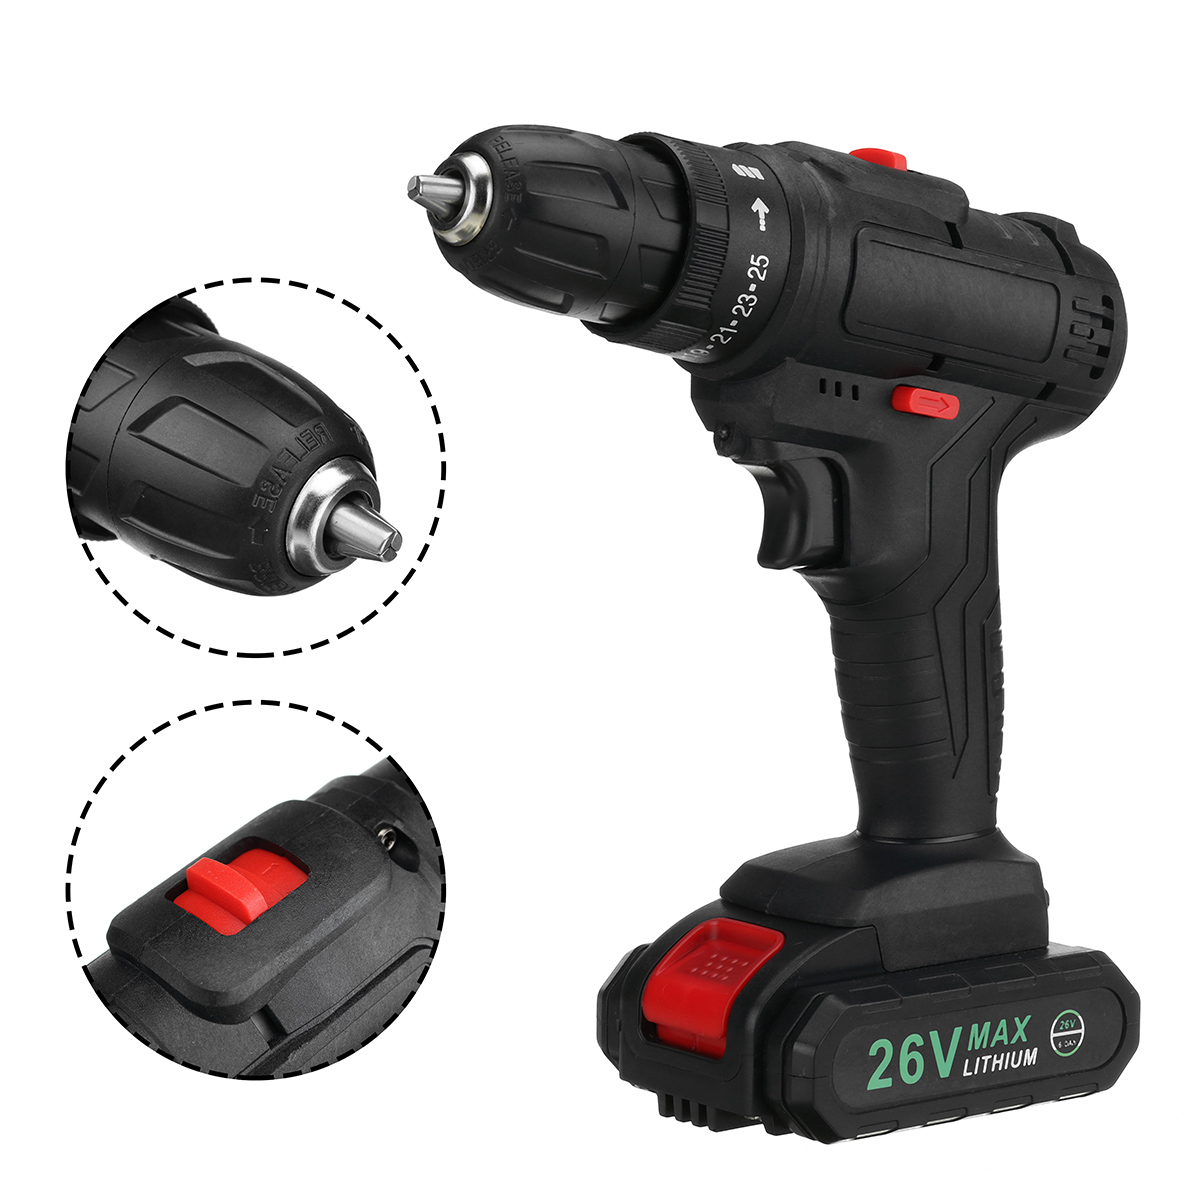 48V-1500W-Electric-Drill-28Nm-25-Gears-LED-Light-Screwdriver-Power-Tool-W-1PC2PCS-Battery-1791184-2